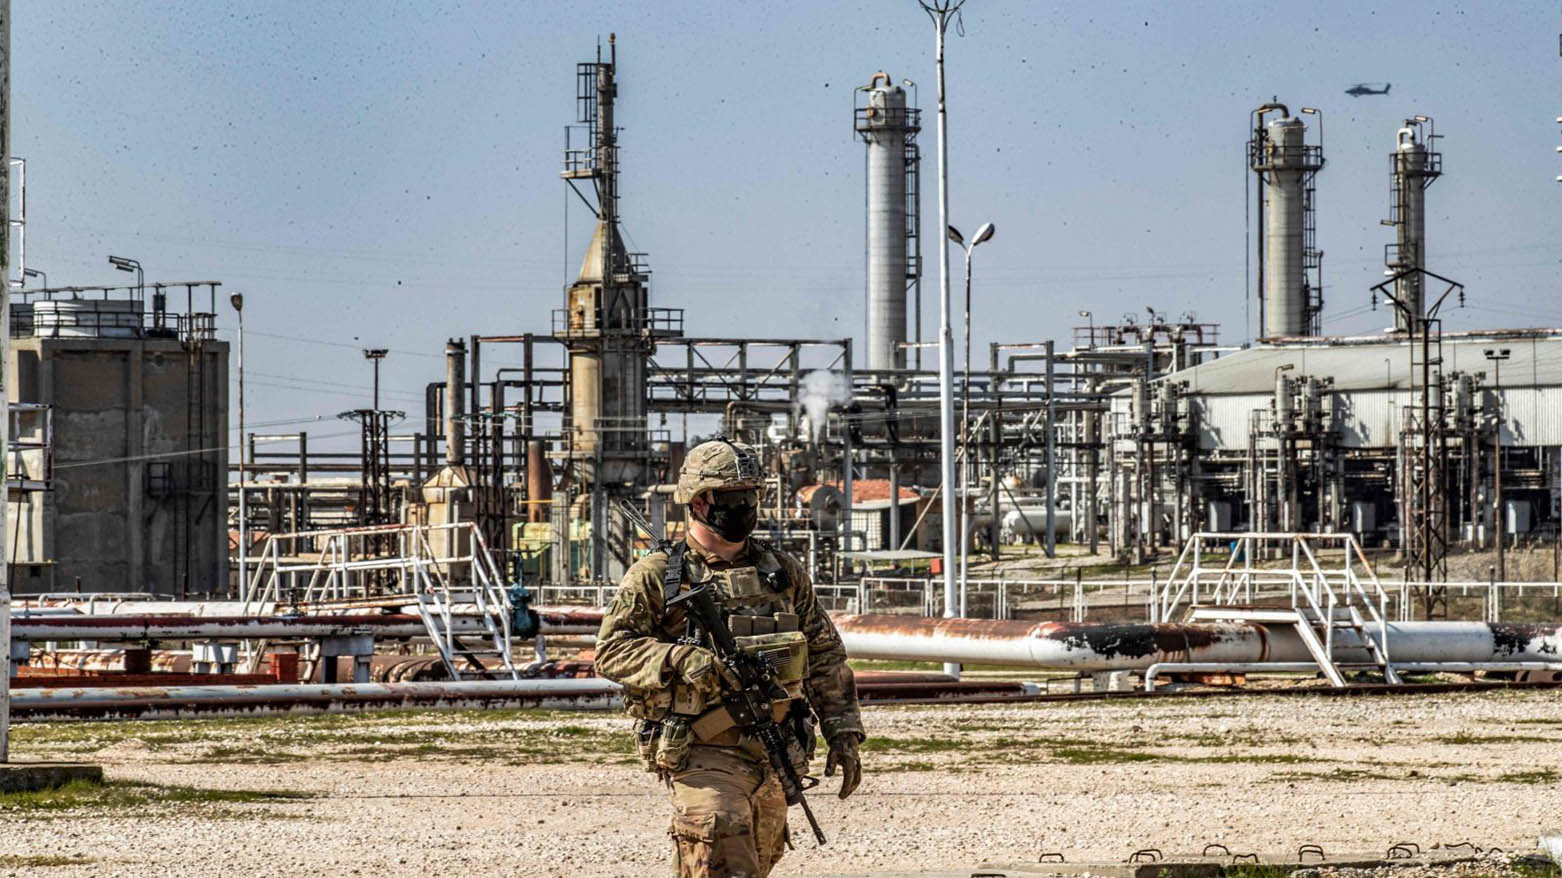 A United States soldier looks on while an AH-64 Apache assault helicopter flies above during a patrol by the Suwaydiyah oil fields in Hassakeh province, northeastern Syria, Feb. 13, 2021. (Photo: AFP)